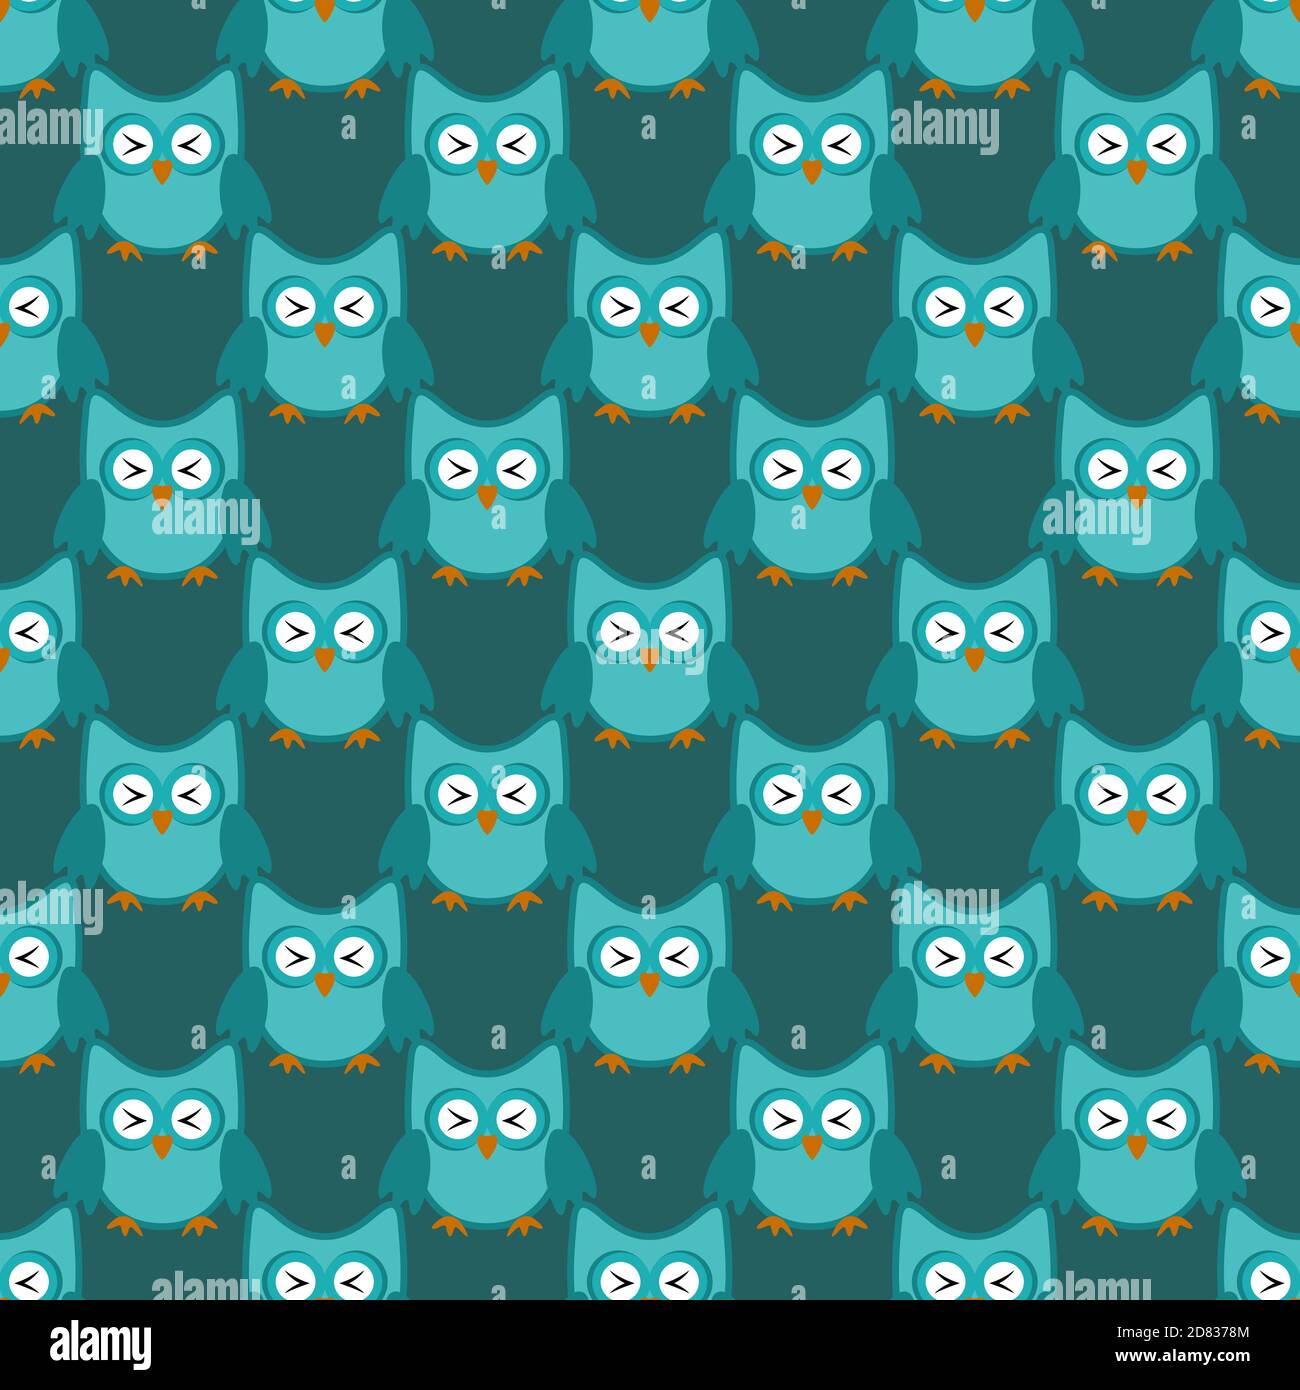 Owl stylized art seemless pattern green colors Stock Vector